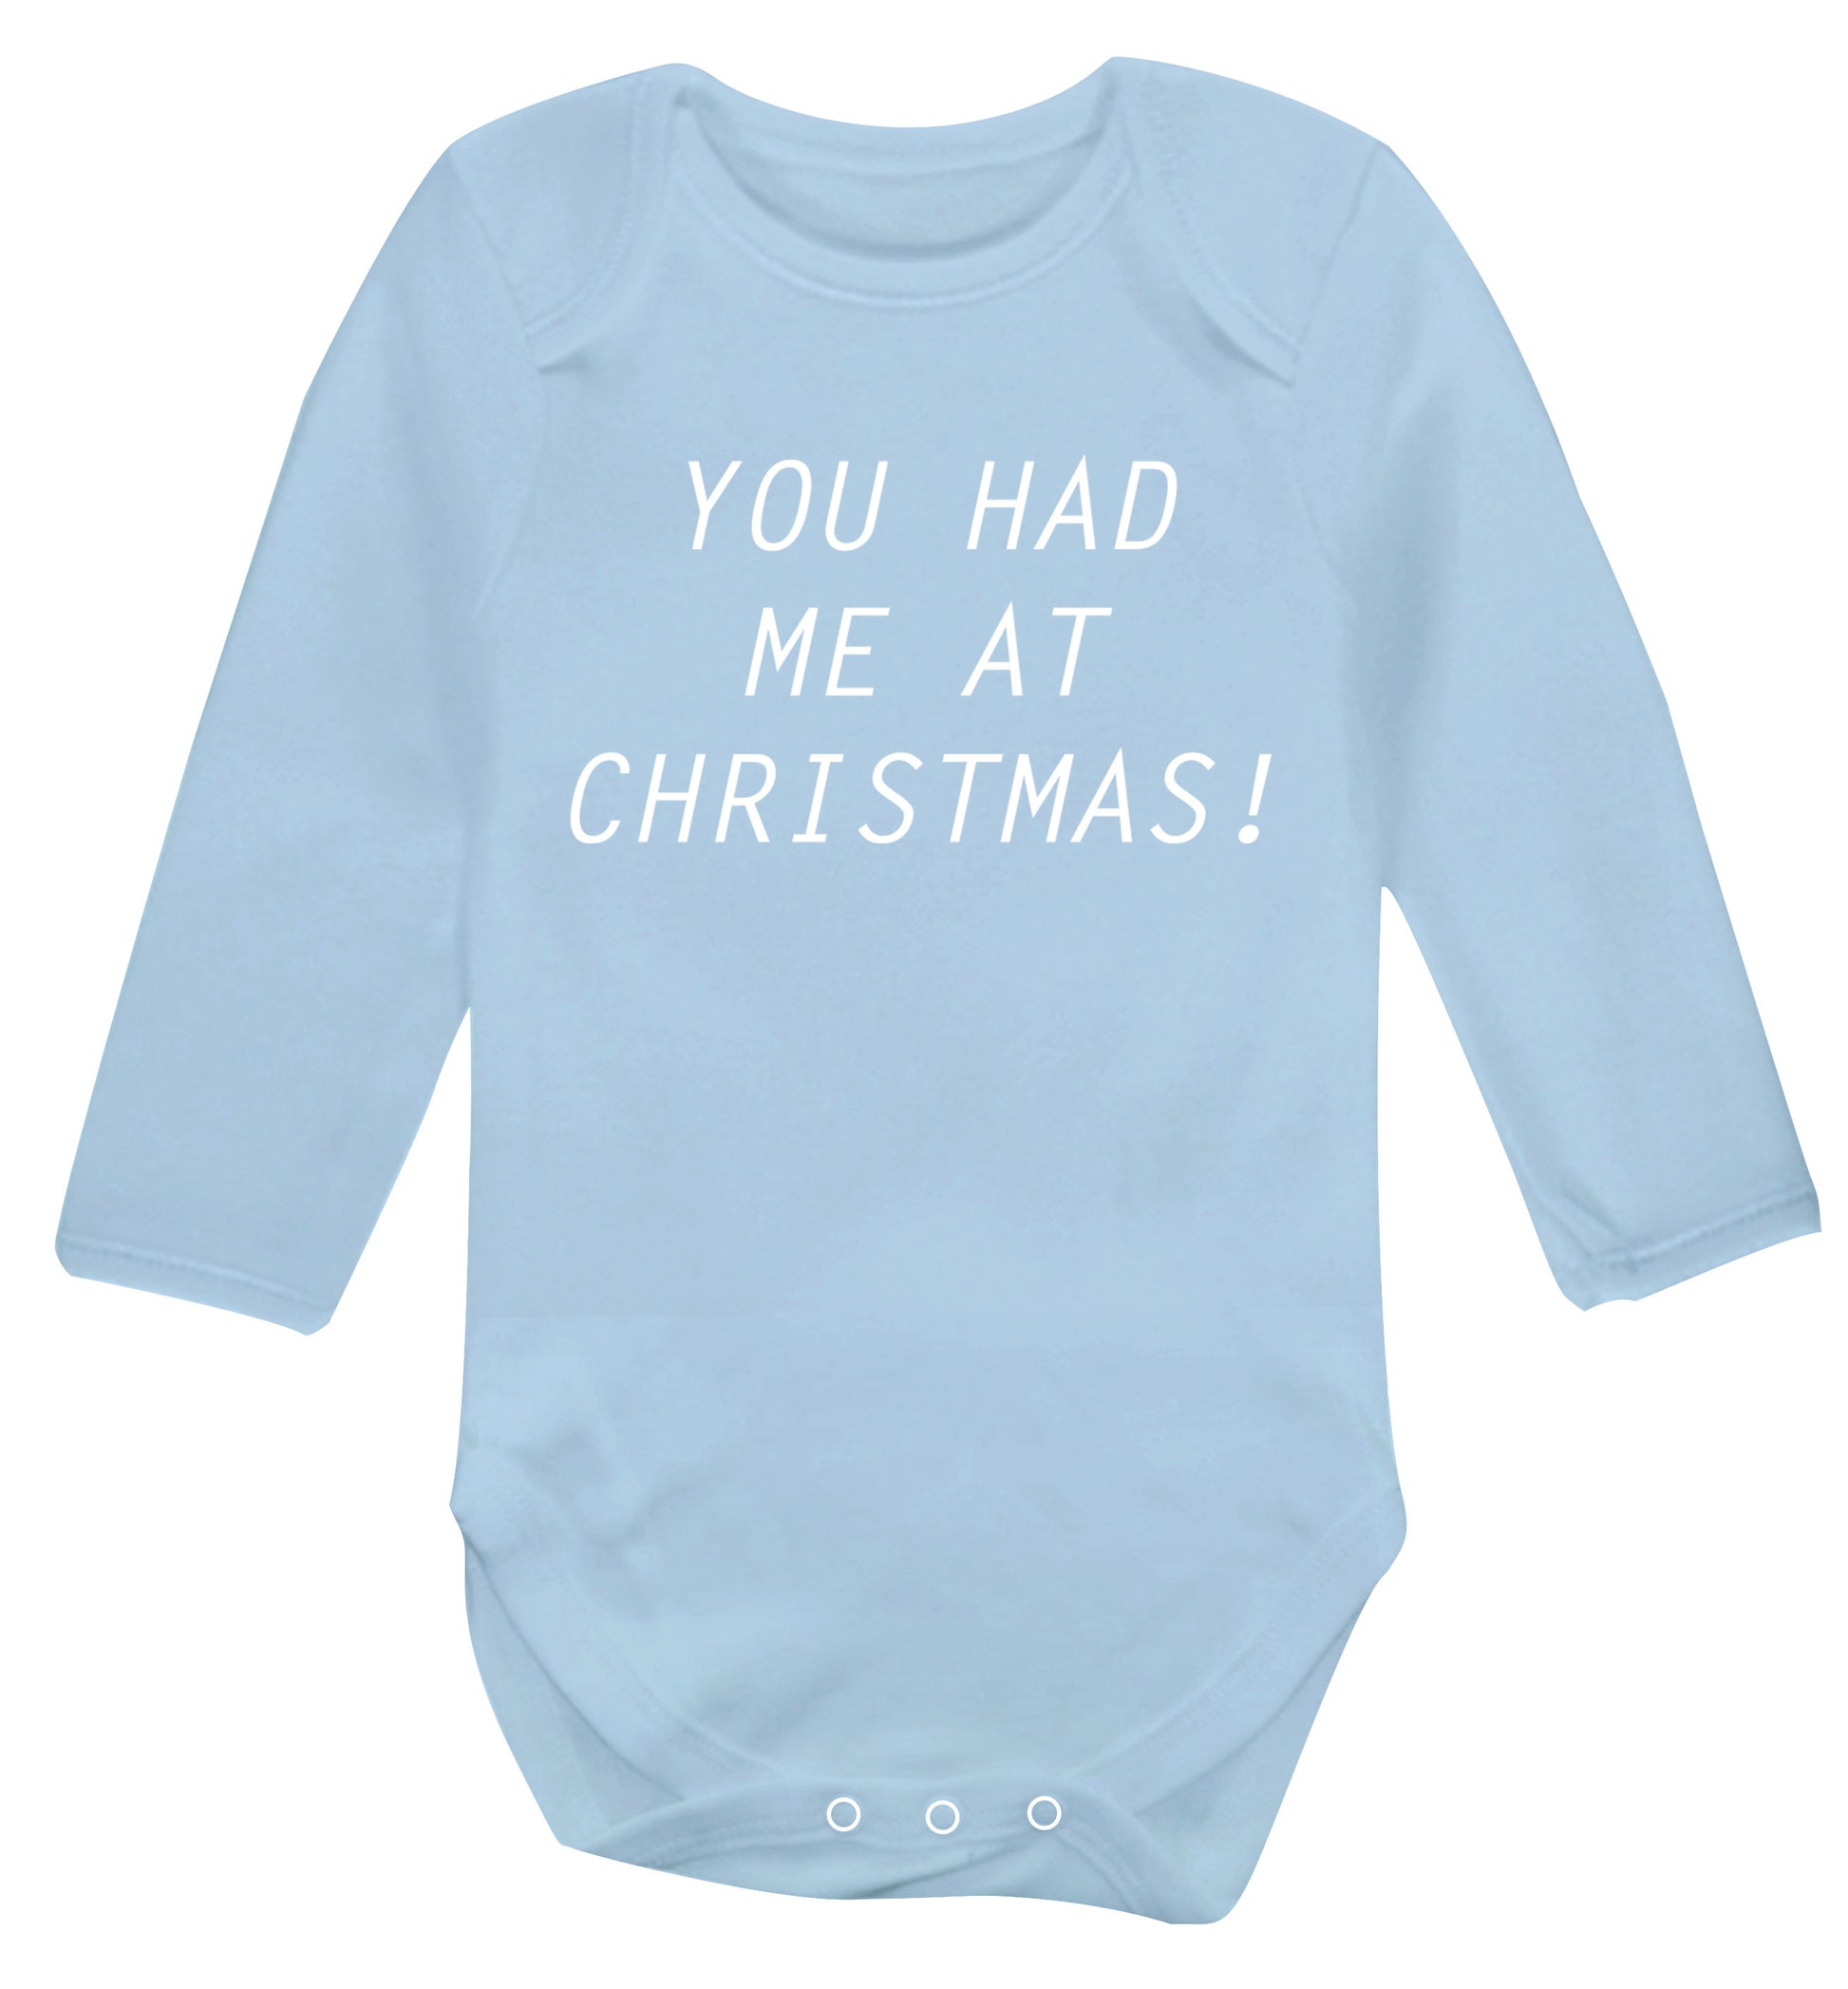 You had me at Christmas Baby Vest long sleeved pale blue 6-12 months